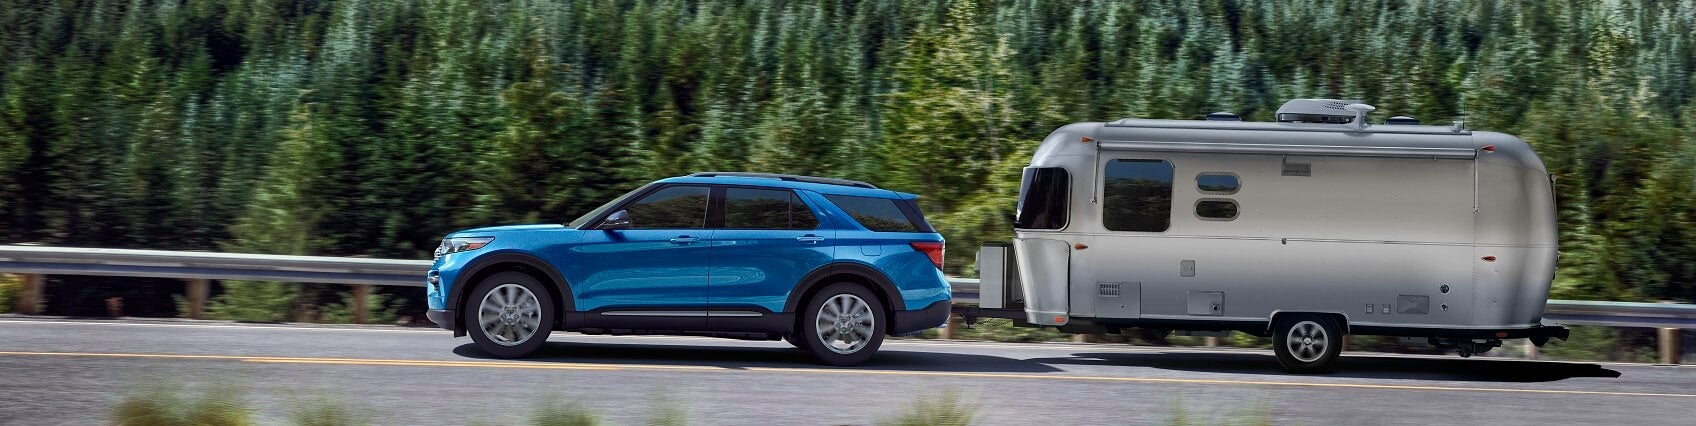 2022 Ford Explorer Towing Capabilities